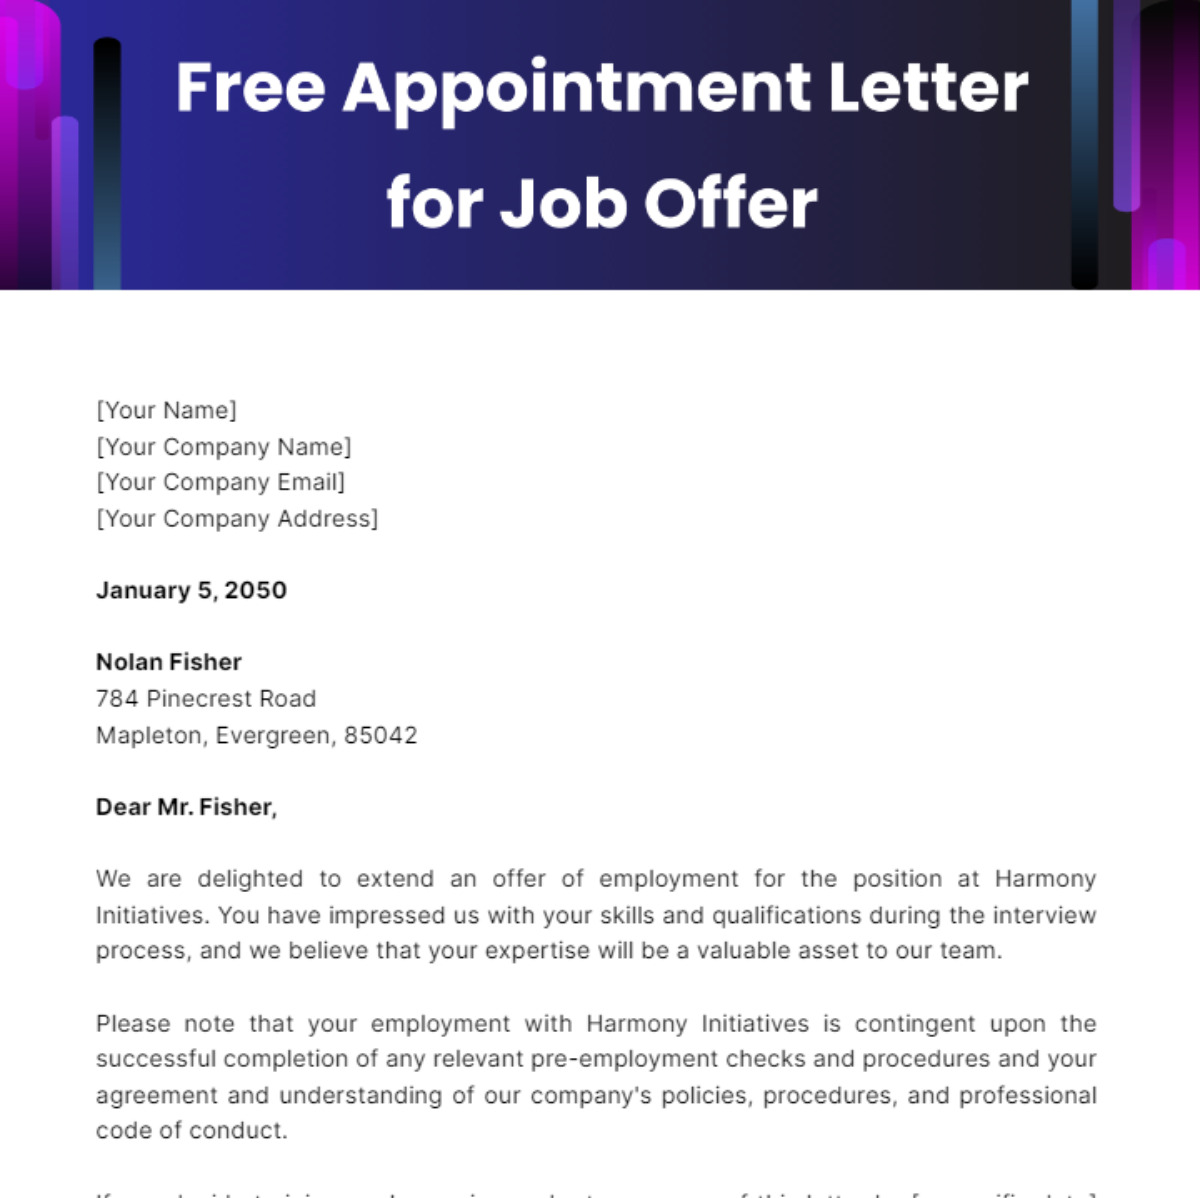 Appointment Letter for Job Offer Template